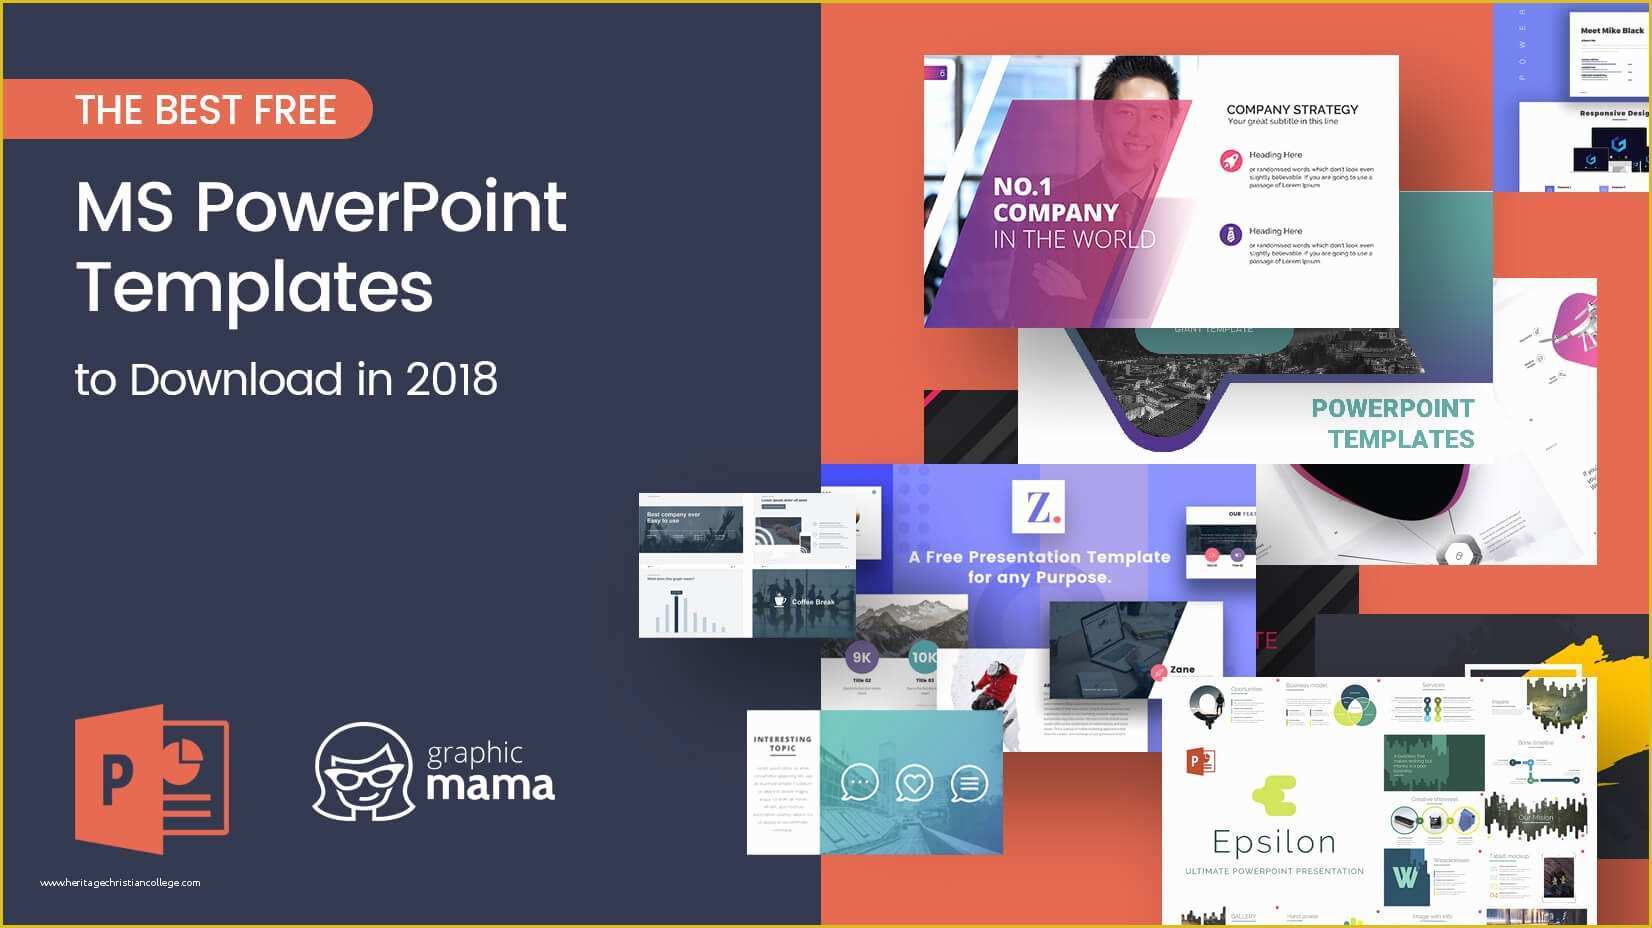 Powerpoint Template Design Free Download Of the Best Free Powerpoint Templates to Download In 2018